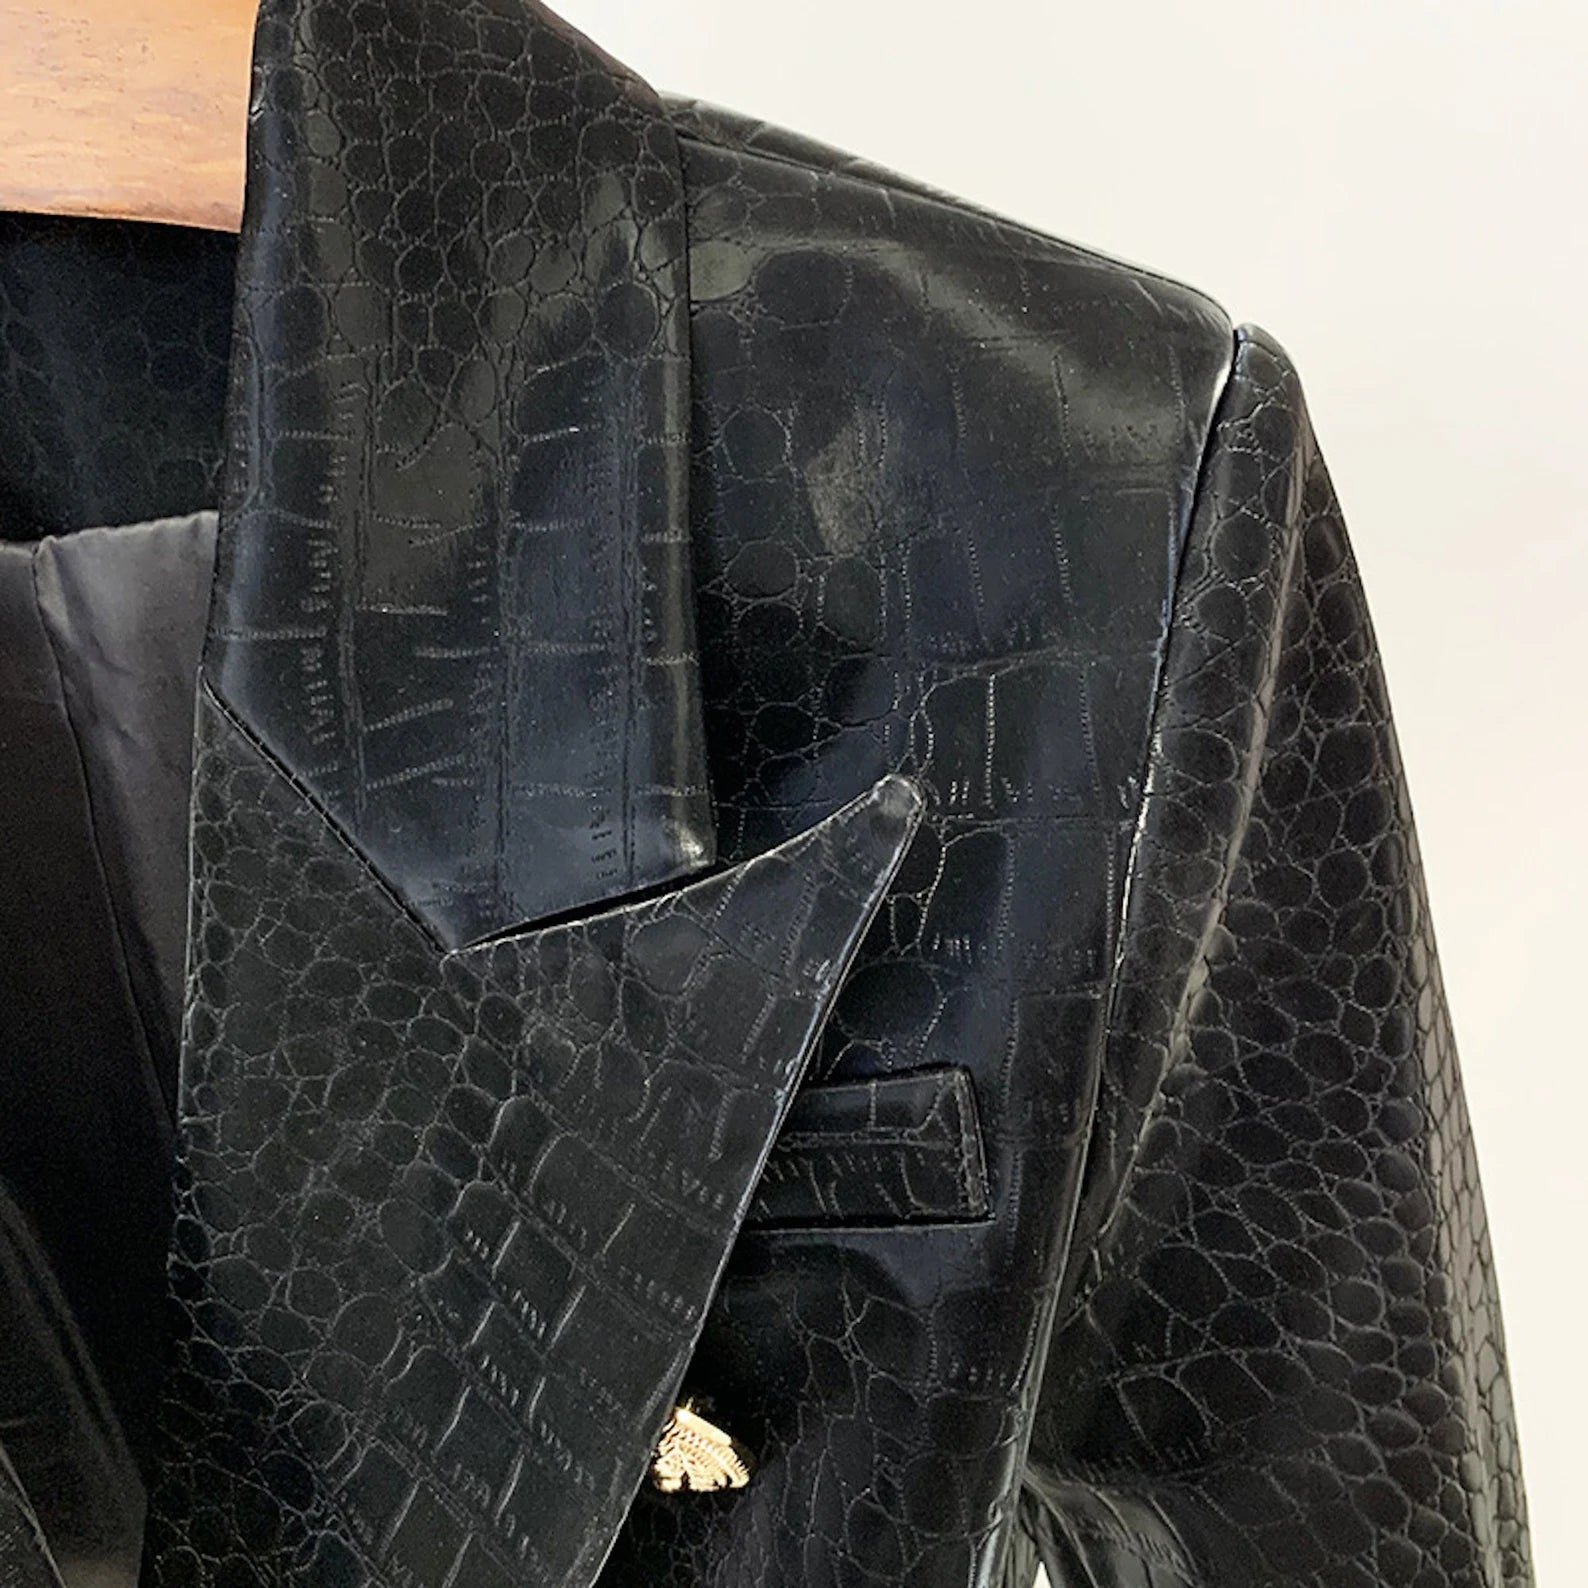 This faux crocodile leather blazer is a must-have for the next Autumn/Winter season. The leather texture adds a touch of refinement to any outfit. The jacket appears to be luxurious and classic due to its crocodile leather appearance. To finish the outfit, pair it with a basic white bodysuit, light wash denim, and chunky sneakers in a black fake leather croc-effect material with a button up front and fit.